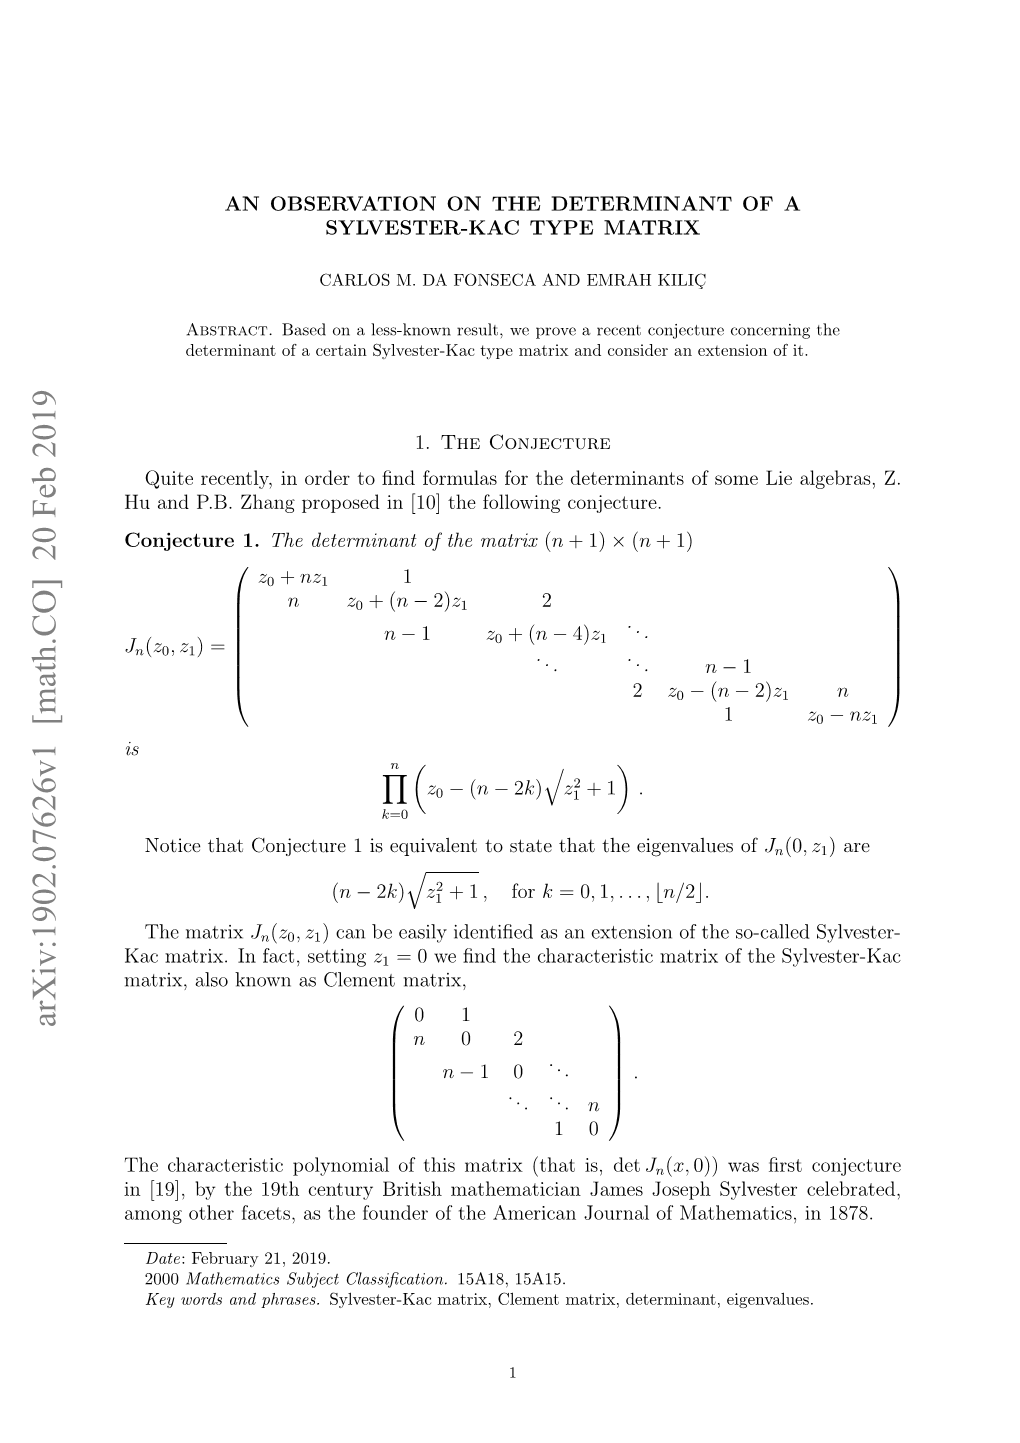 An Observation on the Determinant of a Sylvester-Kac Type Matrix 3